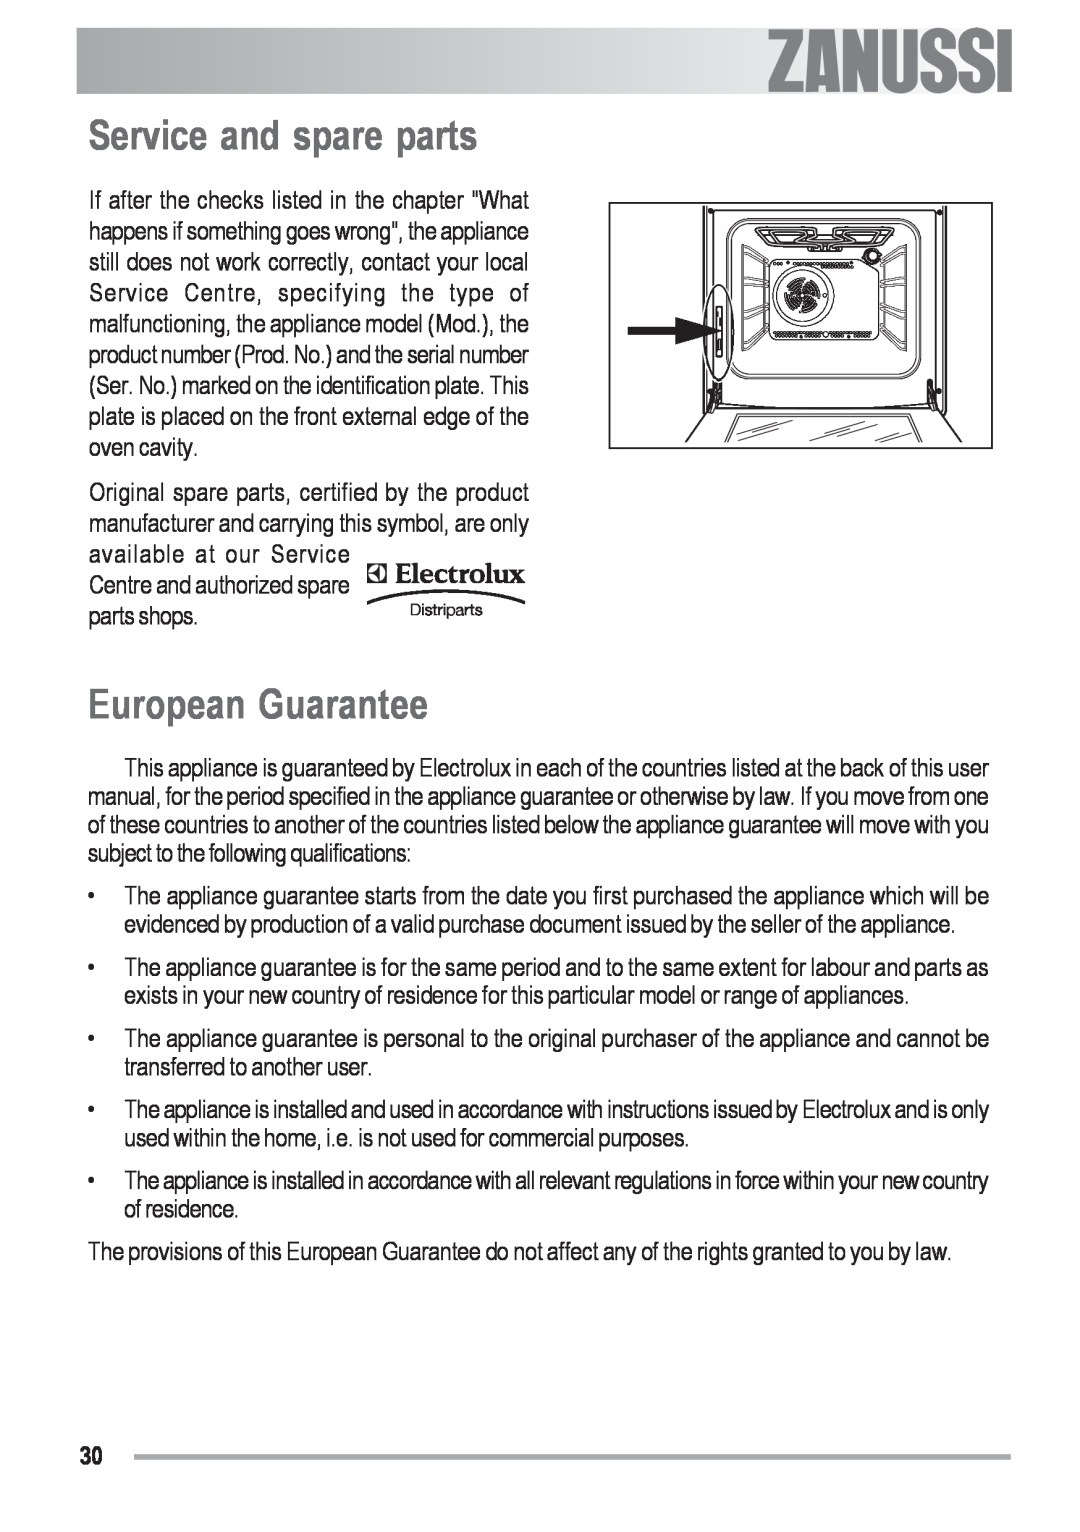 Zanussi ZOU 481 manual Service and spare parts, European Guarantee, electrolux, Centre and authorized spare parts shops 